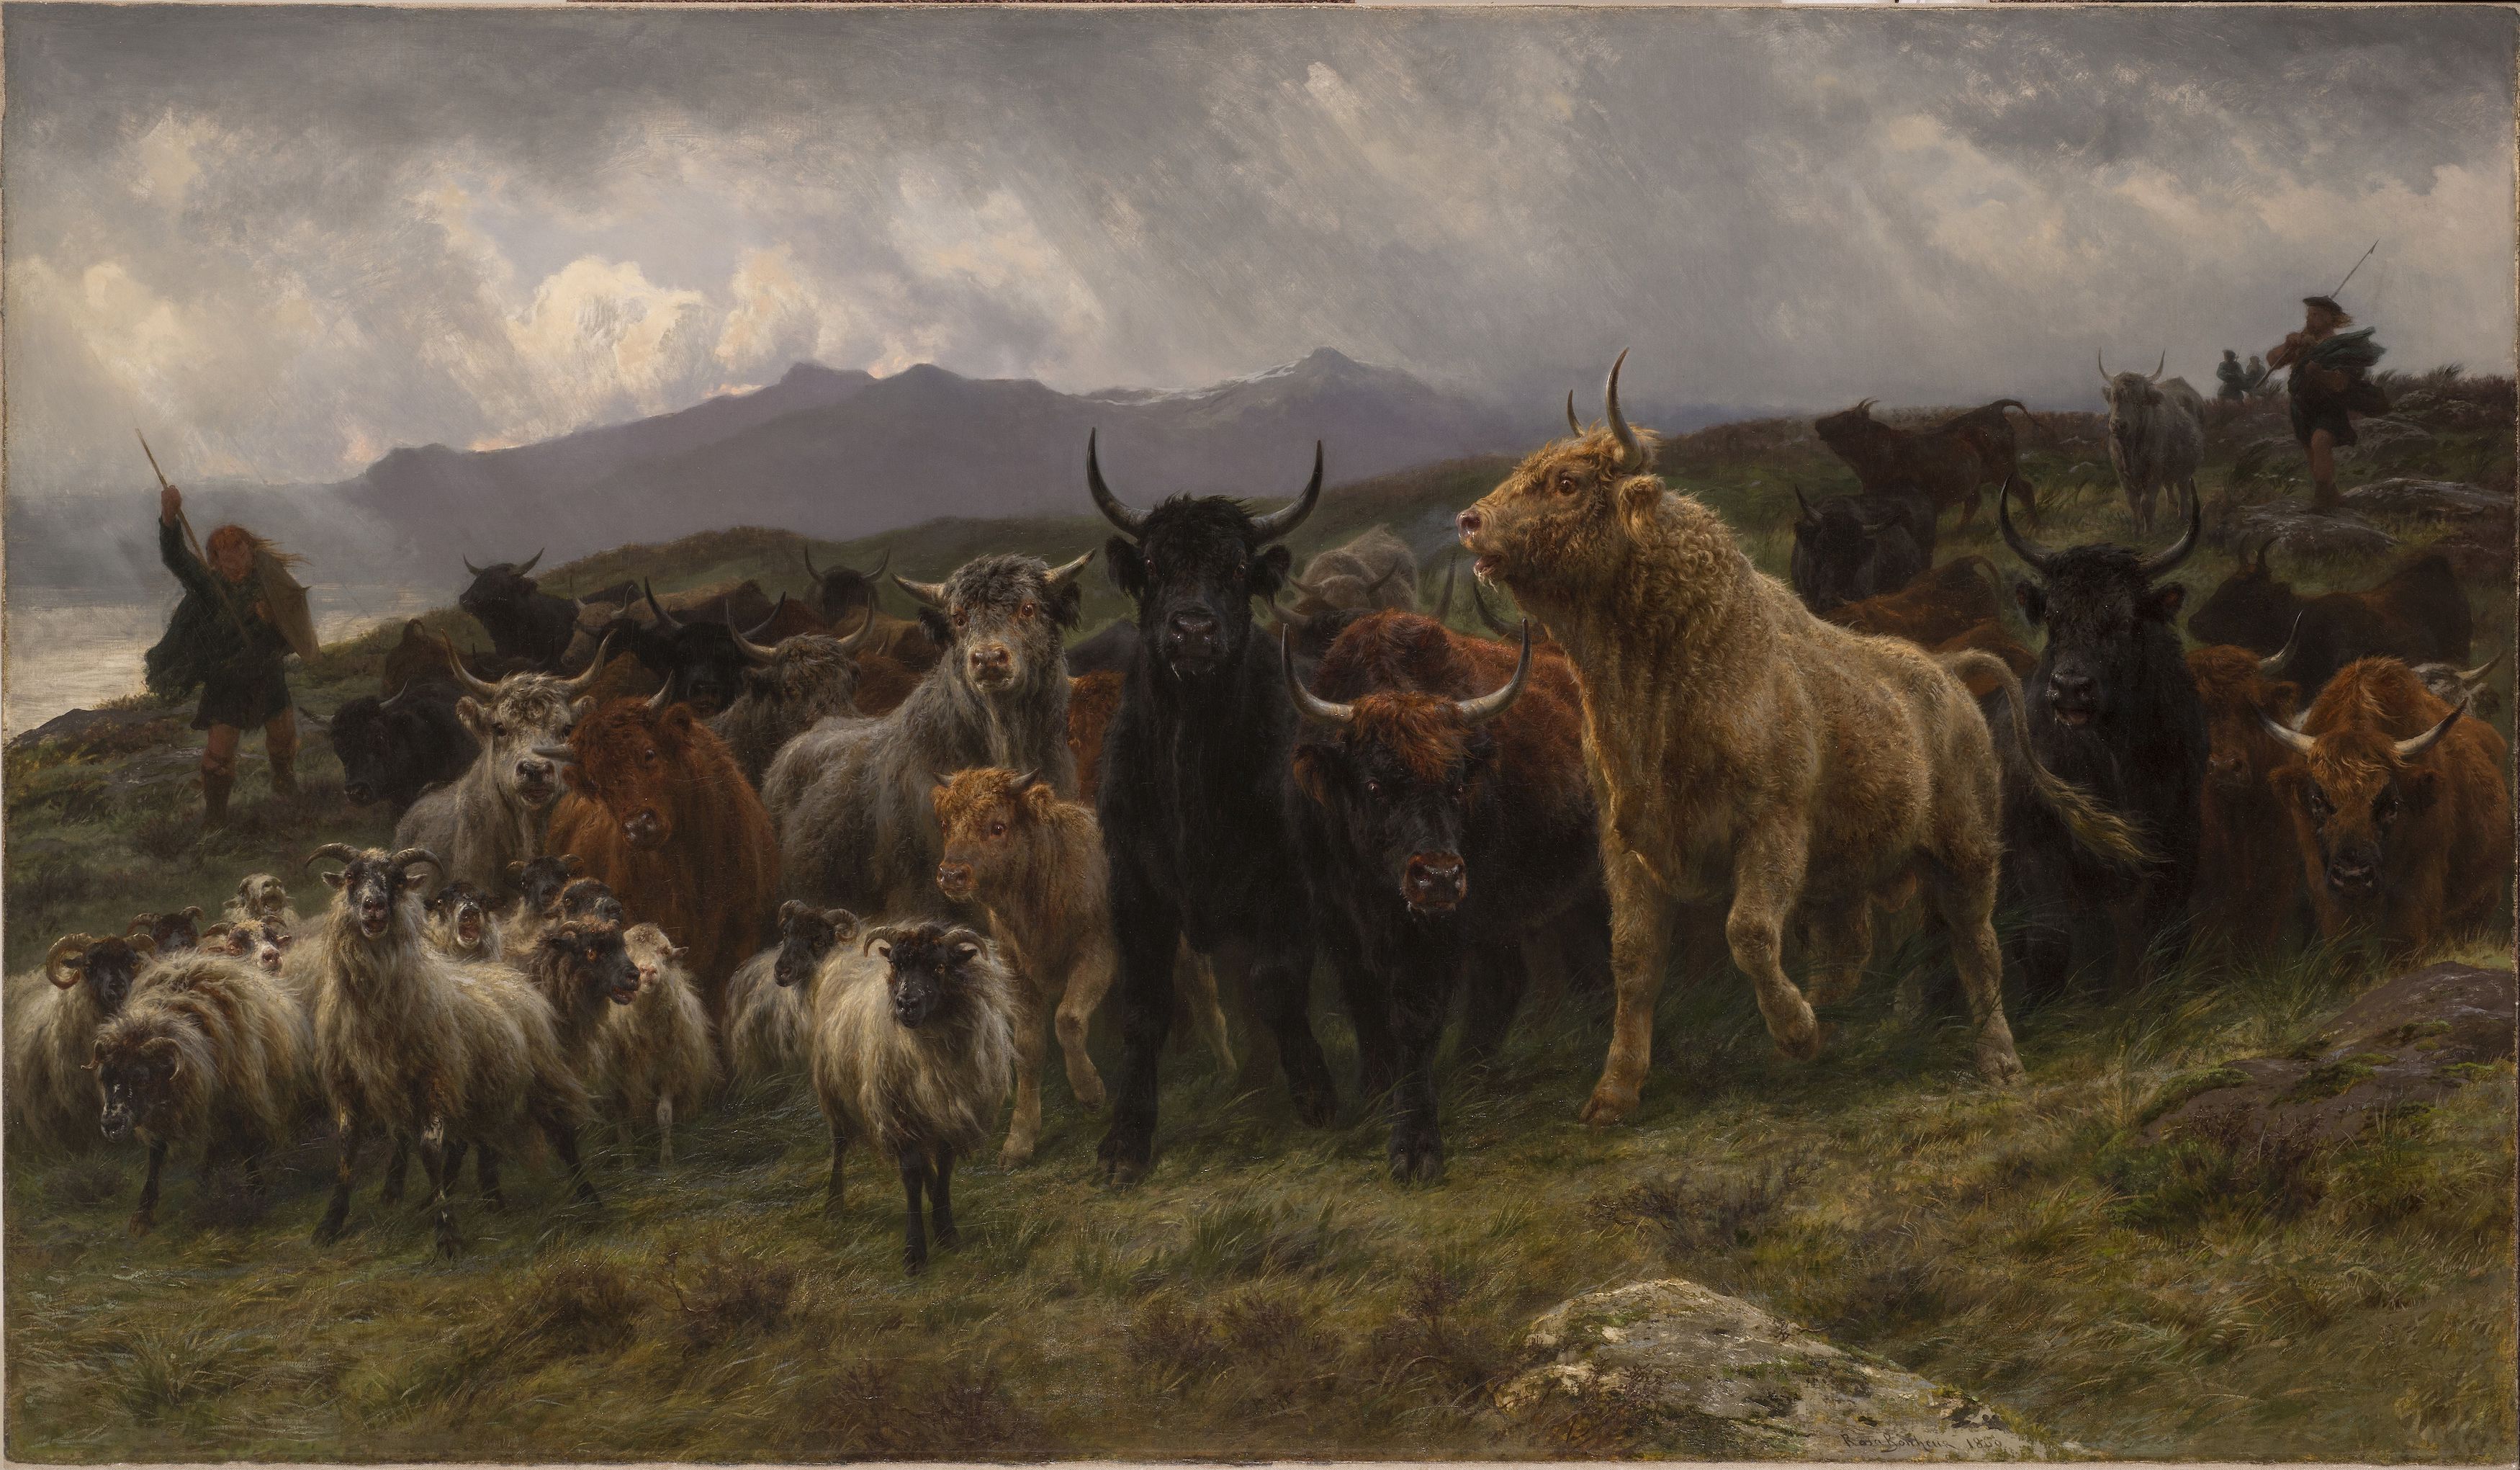 Highland Raid by Rosa Bonheur - 1860 - 129.5 x 213.3 cm National Museum of Women in the Arts